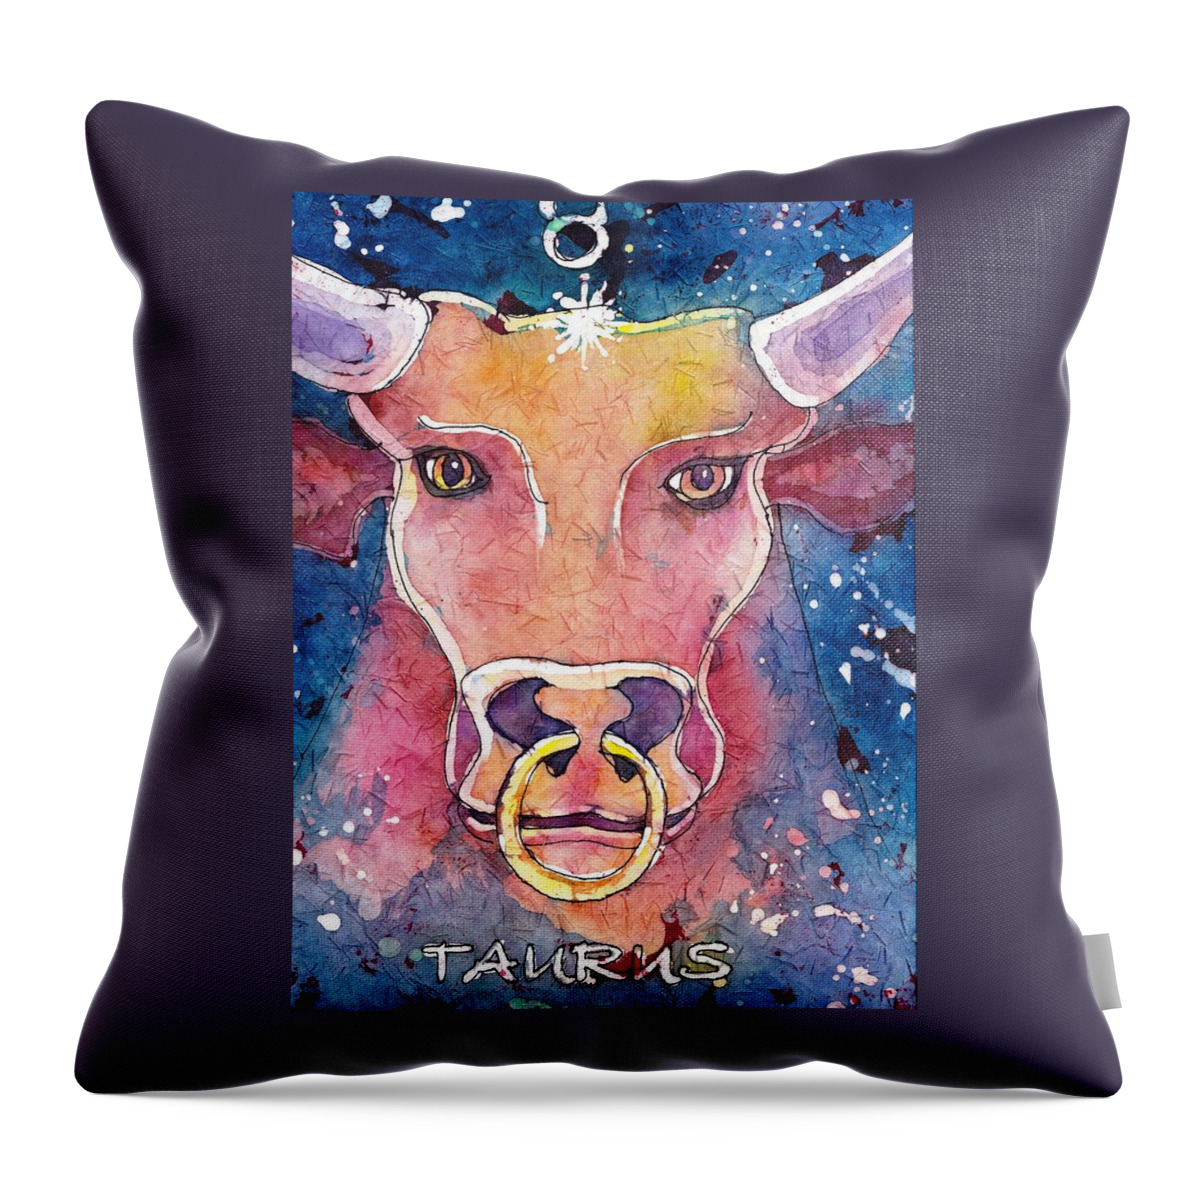 Zodiac Throw Pillow featuring the painting Taurus by Ruth Kamenev